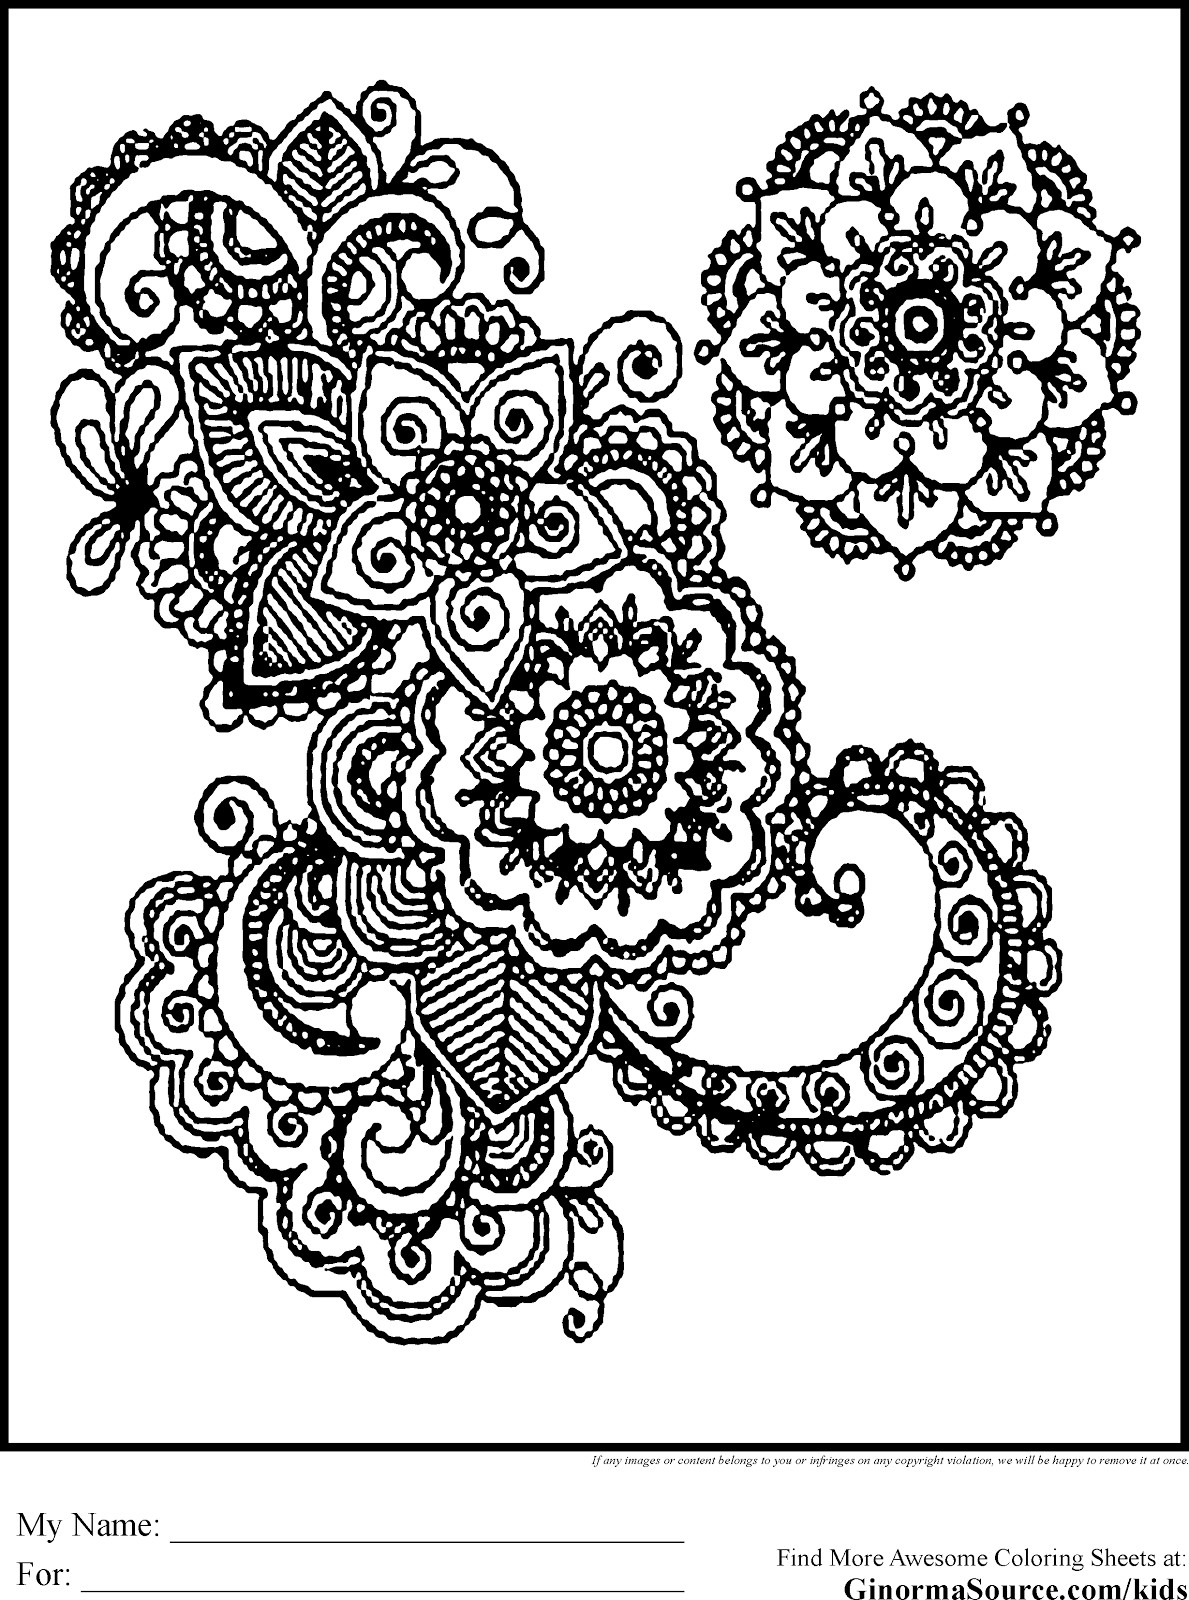 Printable Advanced Coloring Pages
 advanced coloring pages for adults Free Coloring Pages